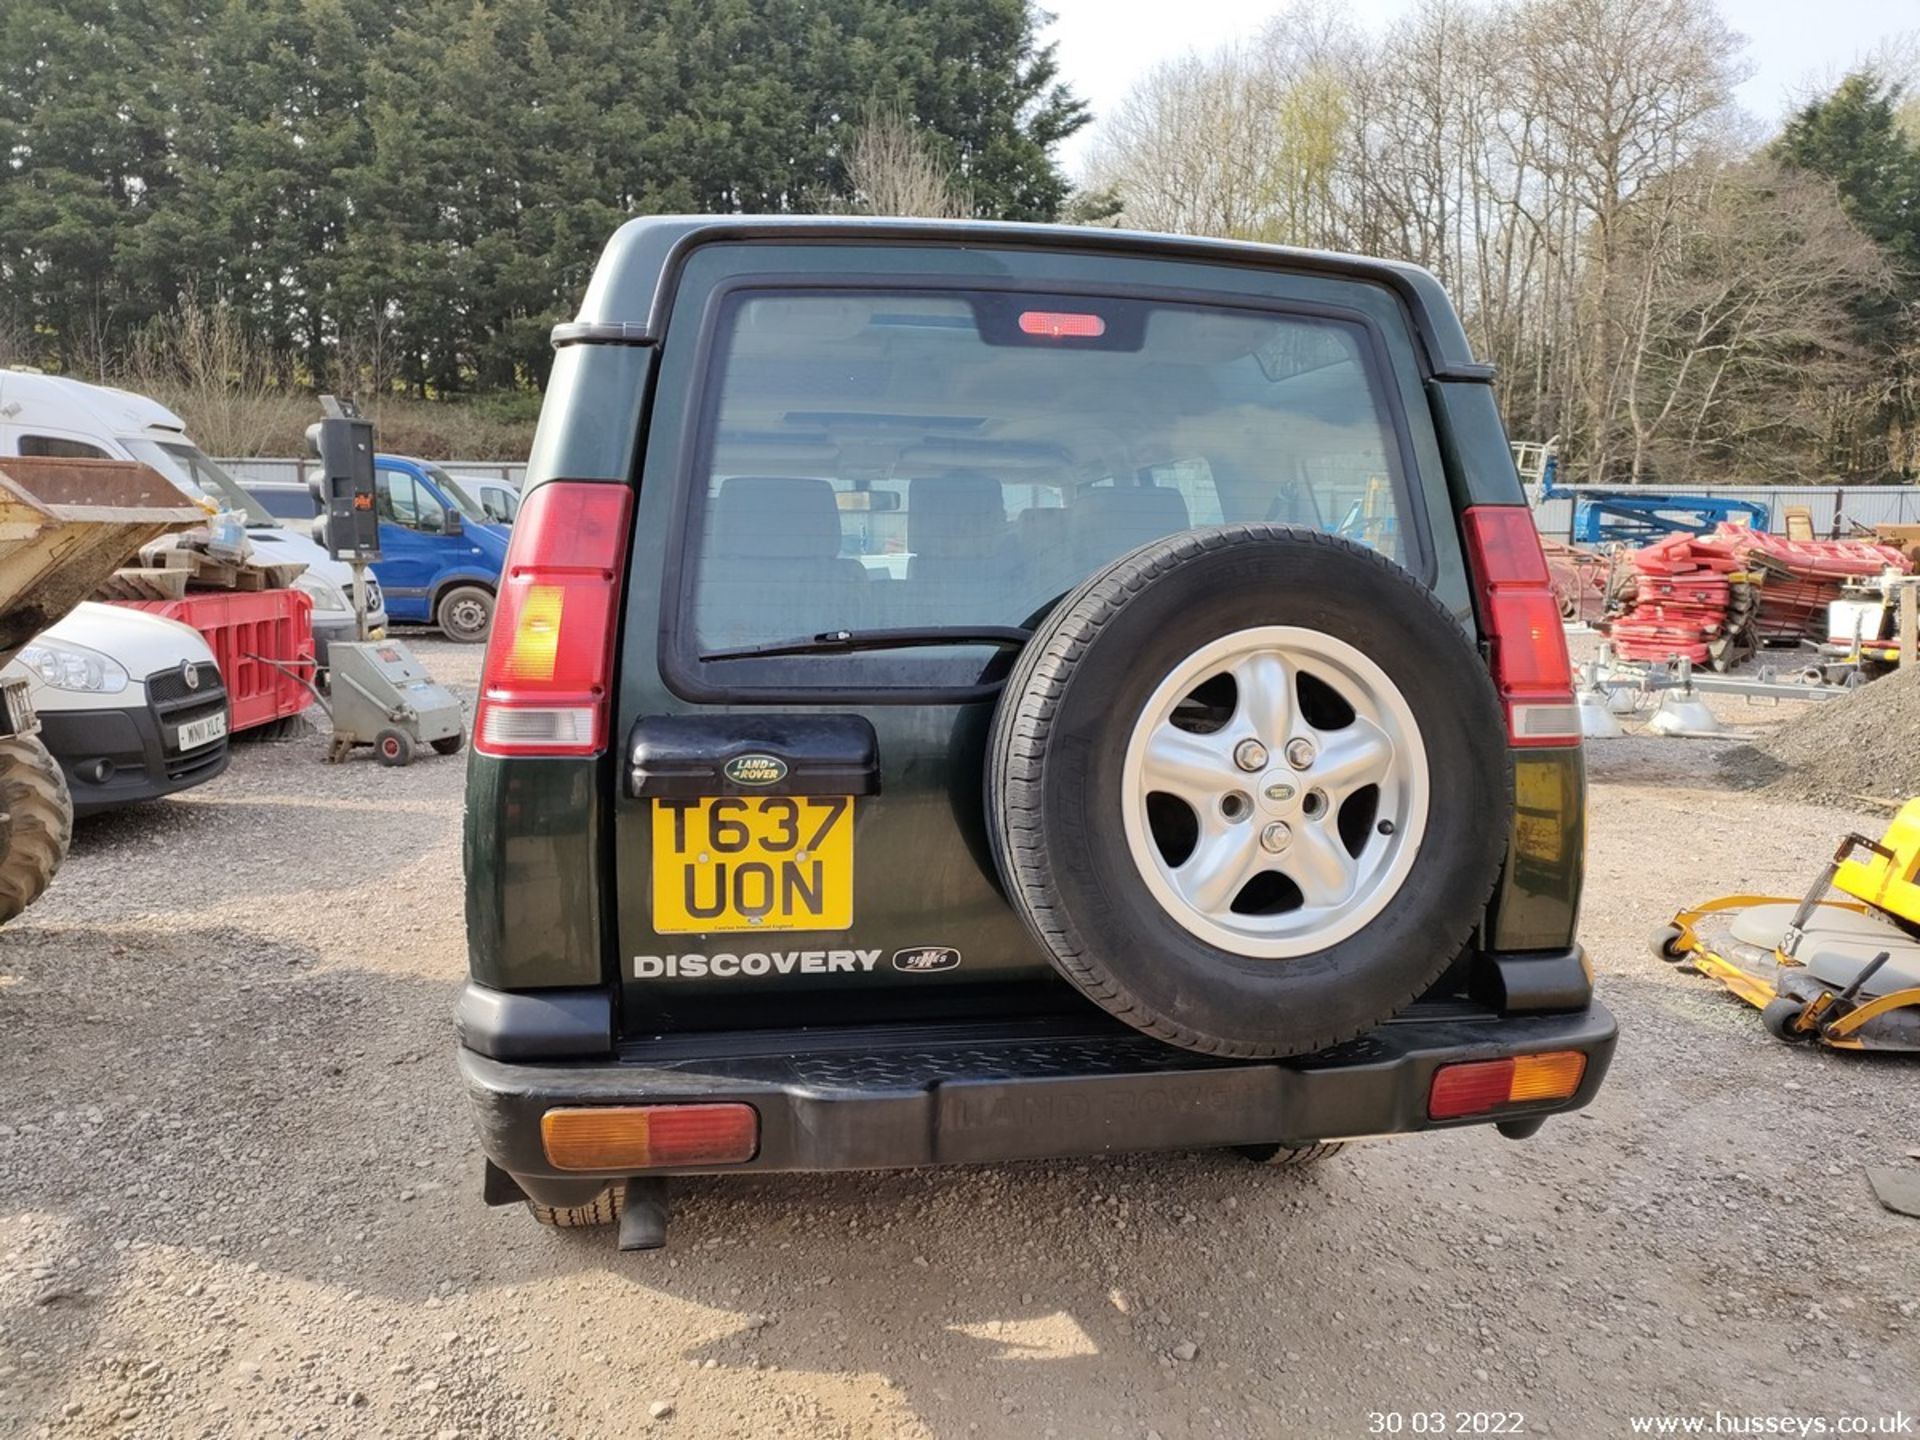 1999 LAND ROVER DISCOVERY TD5 GS - 2495cc 5dr Estate (Green) - Image 10 of 18